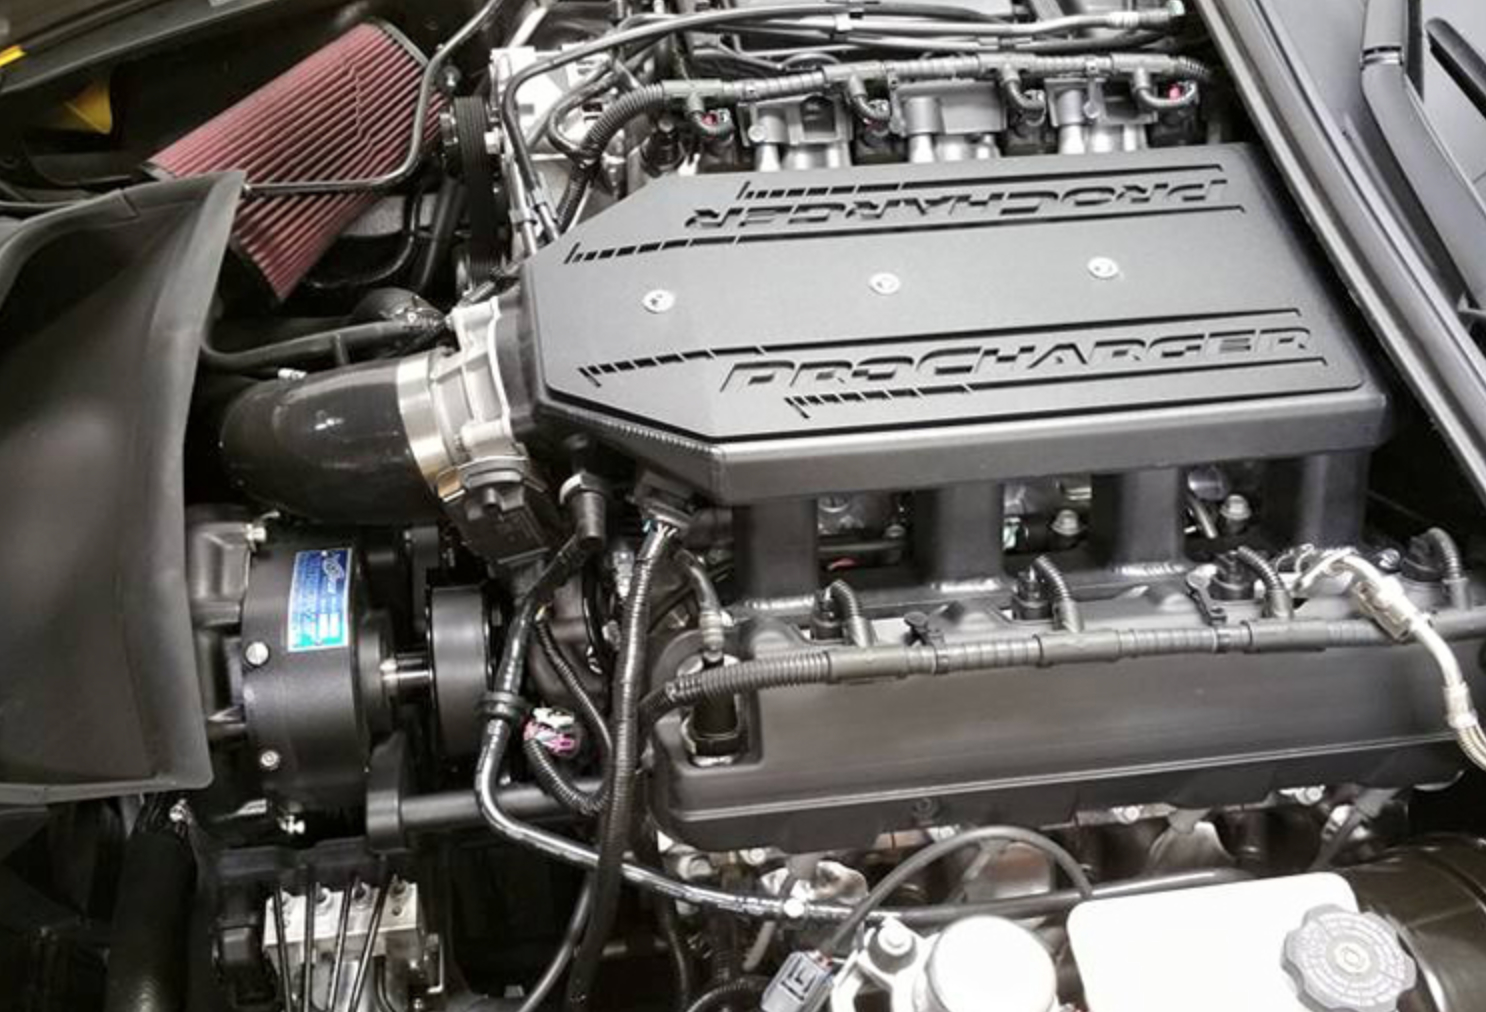 Advanced Modern Performance, or AMP, has pushed over 1,000 hp out of its C7...